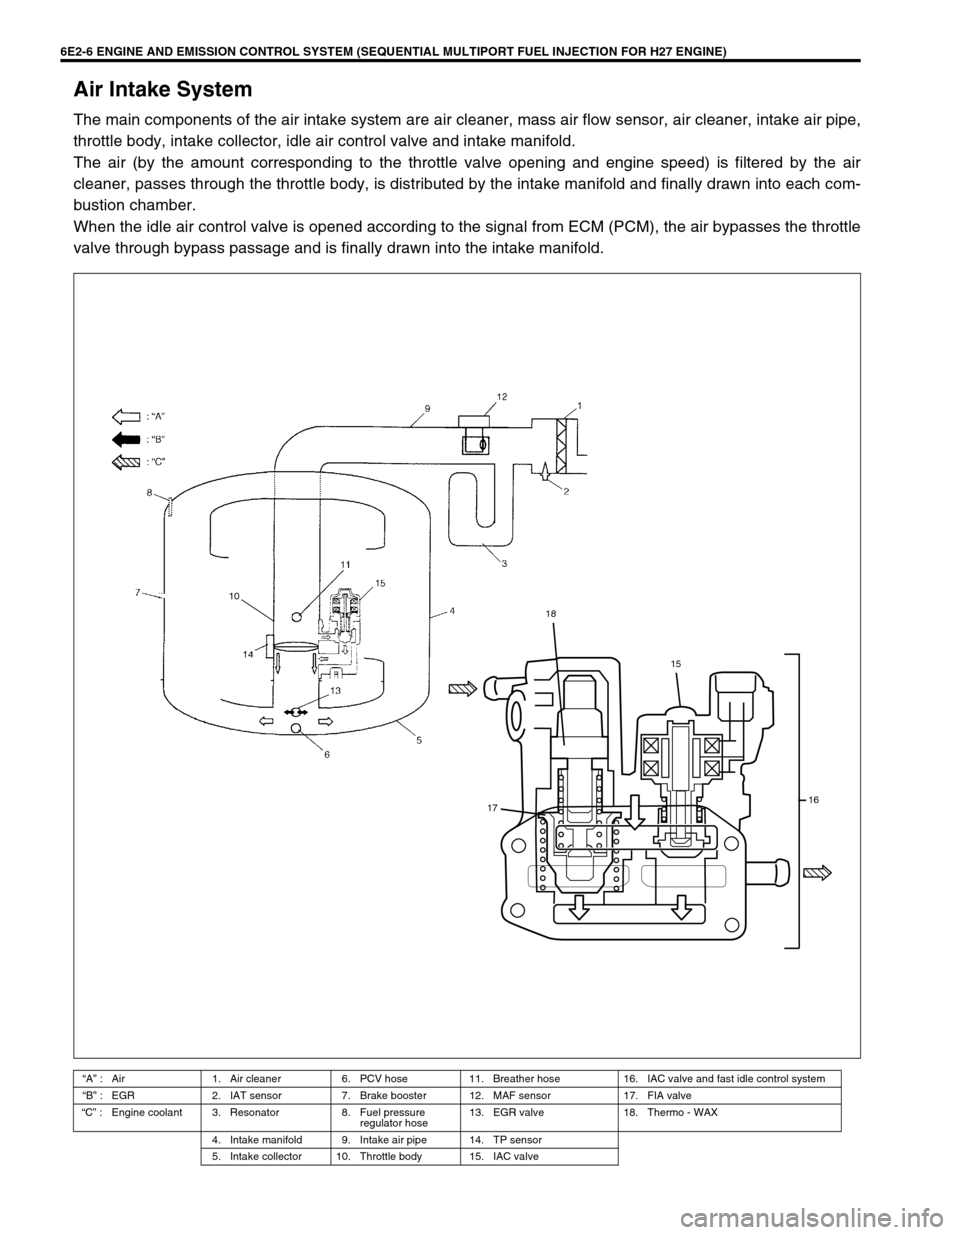 SUZUKI GRAND VITARA 2001 2.G User Guide 6E2-6 ENGINE AND EMISSION CONTROL SYSTEM (SEQUENTIAL MULTIPORT FUEL INJECTION FOR H27 ENGINE)
Air Intake System
The main components of the air intake system are air cleaner, mass air flow sensor, air 